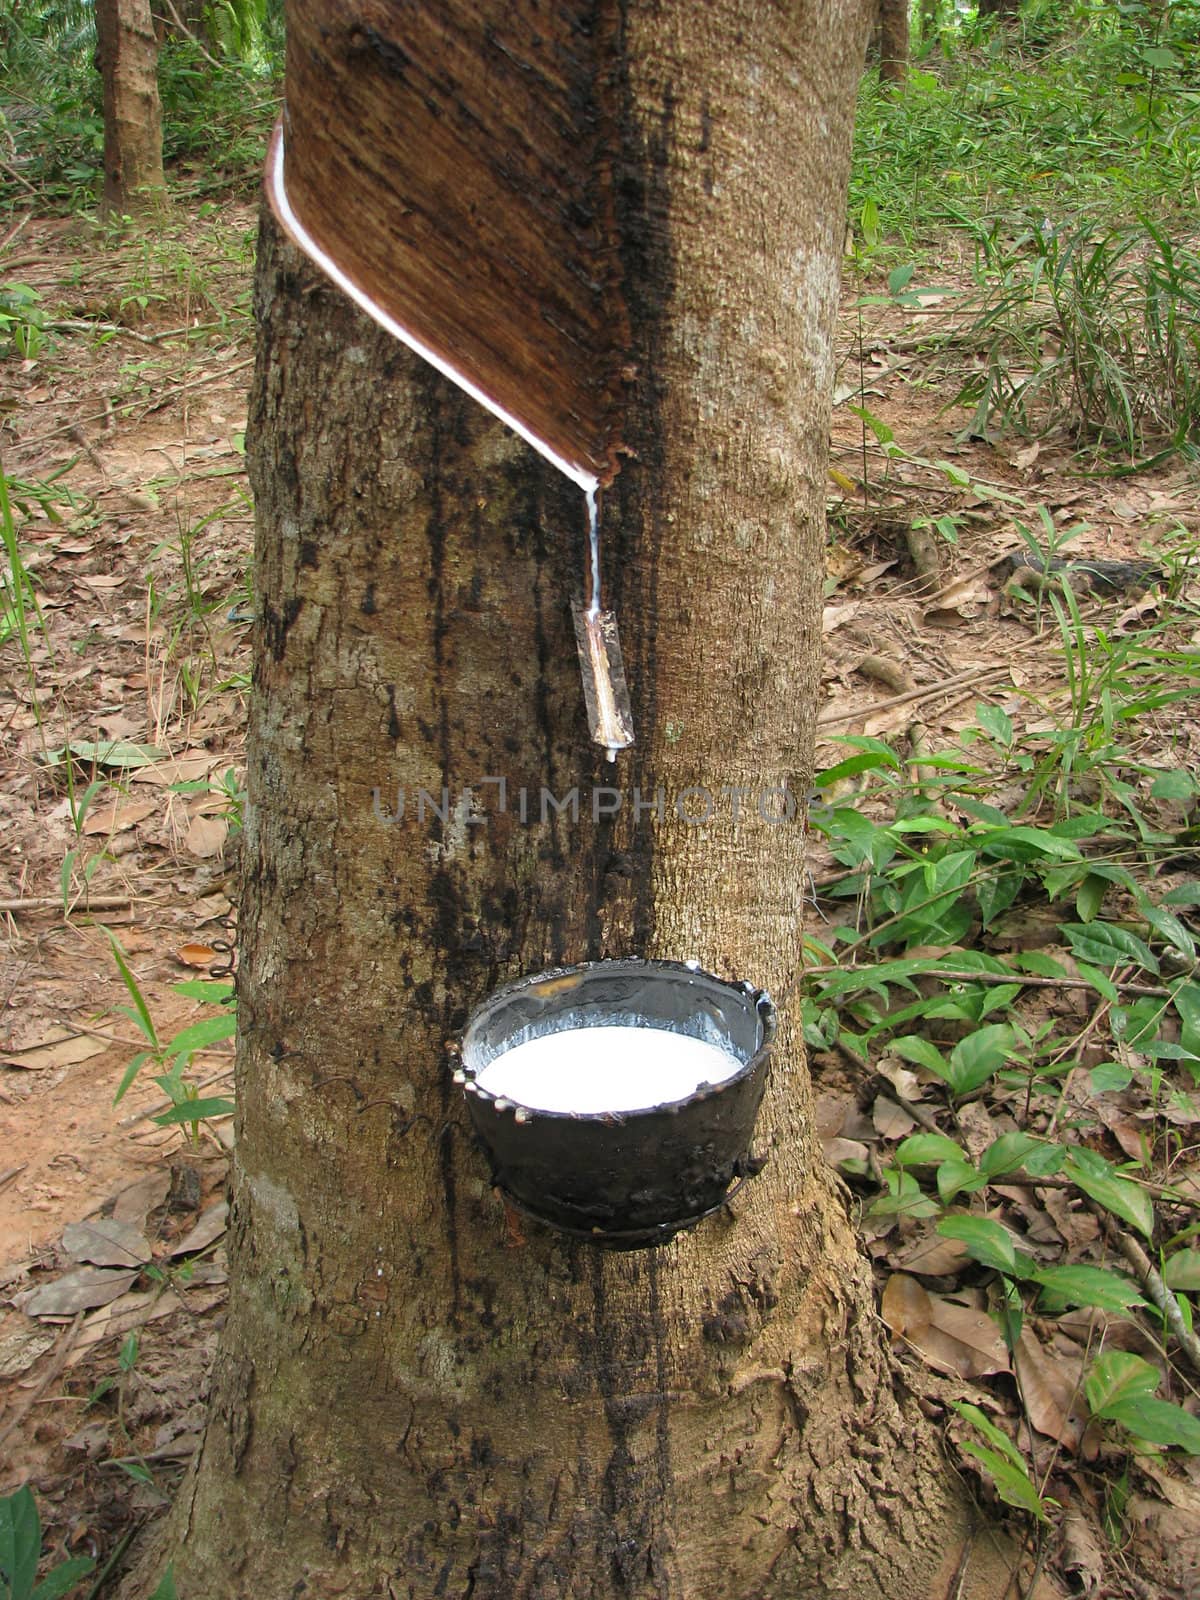 Latex flows from para rubber tree